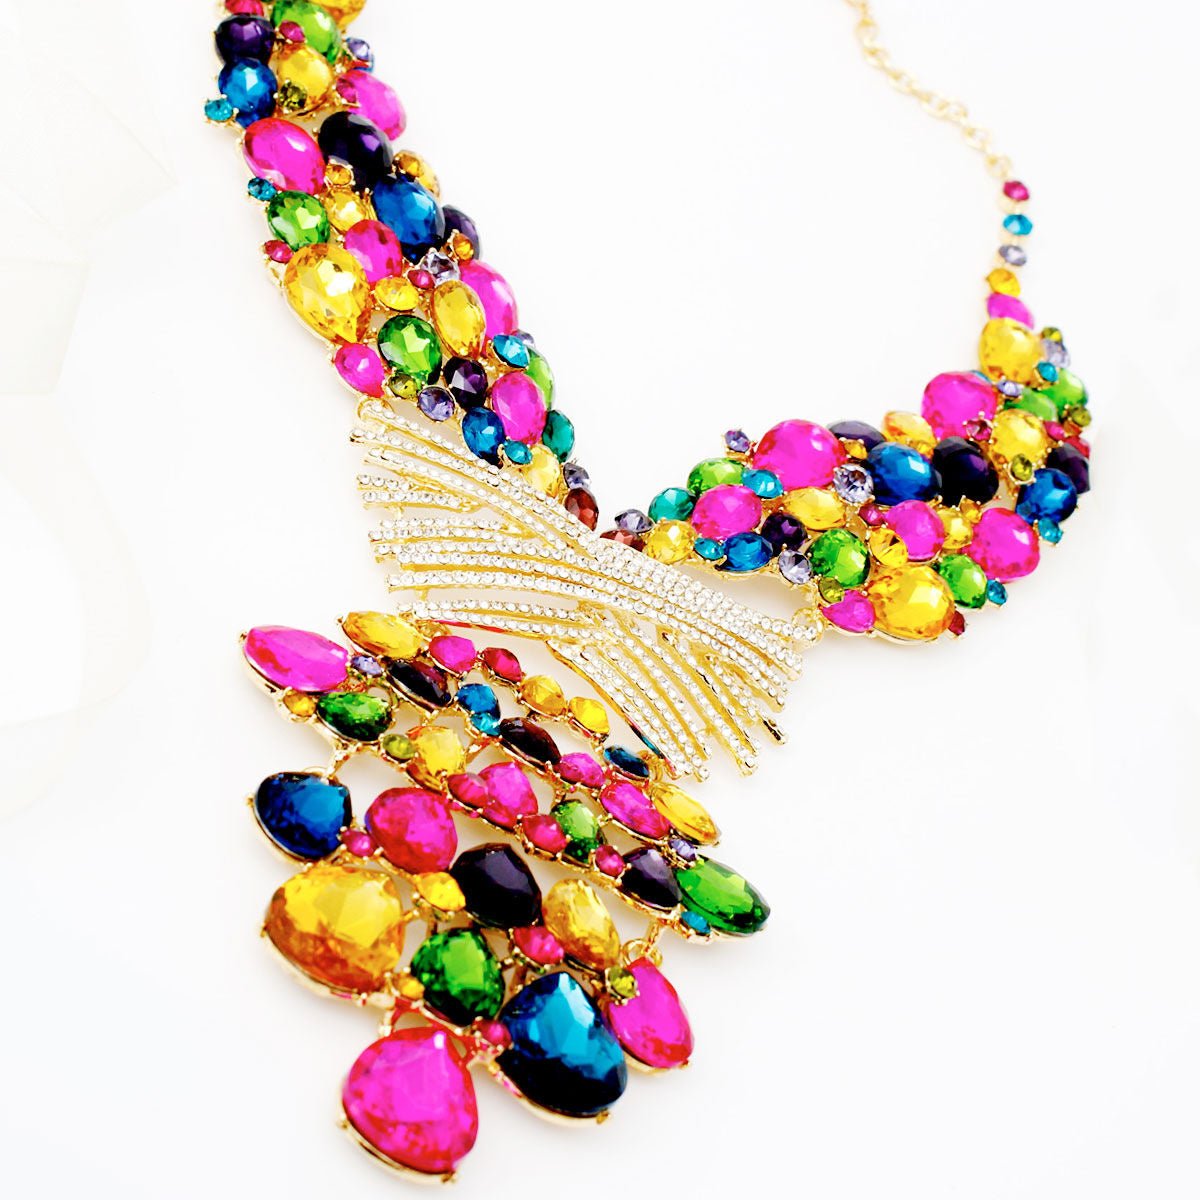 Crystal Necklace Multi Jeweled Bib for Women